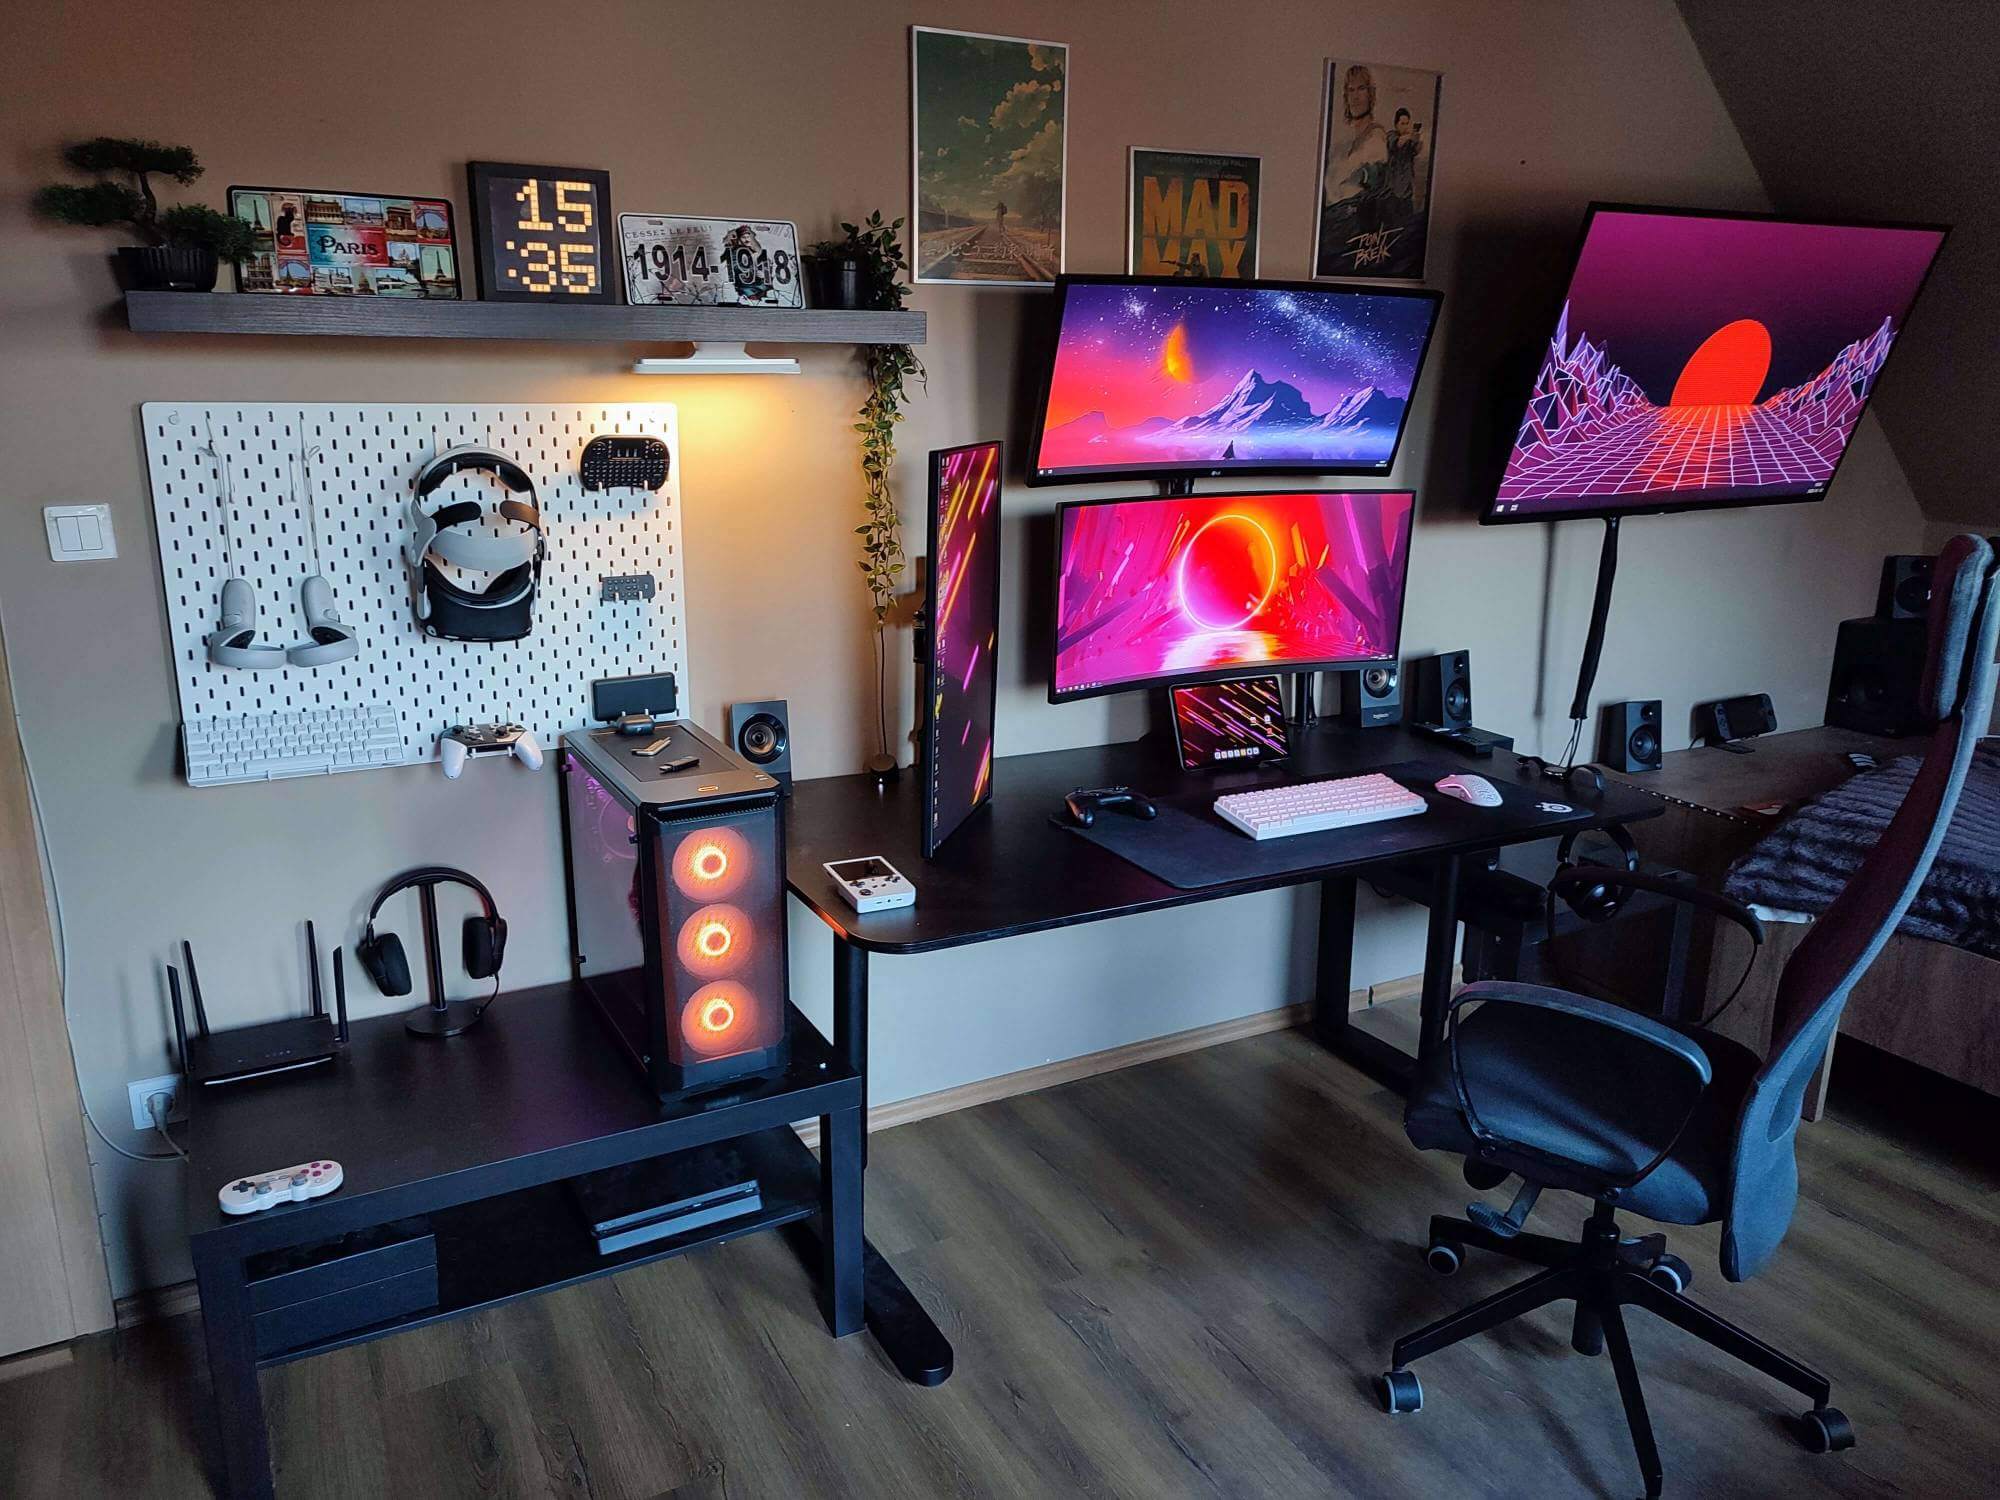 Desk setup with four screens in a home workspace